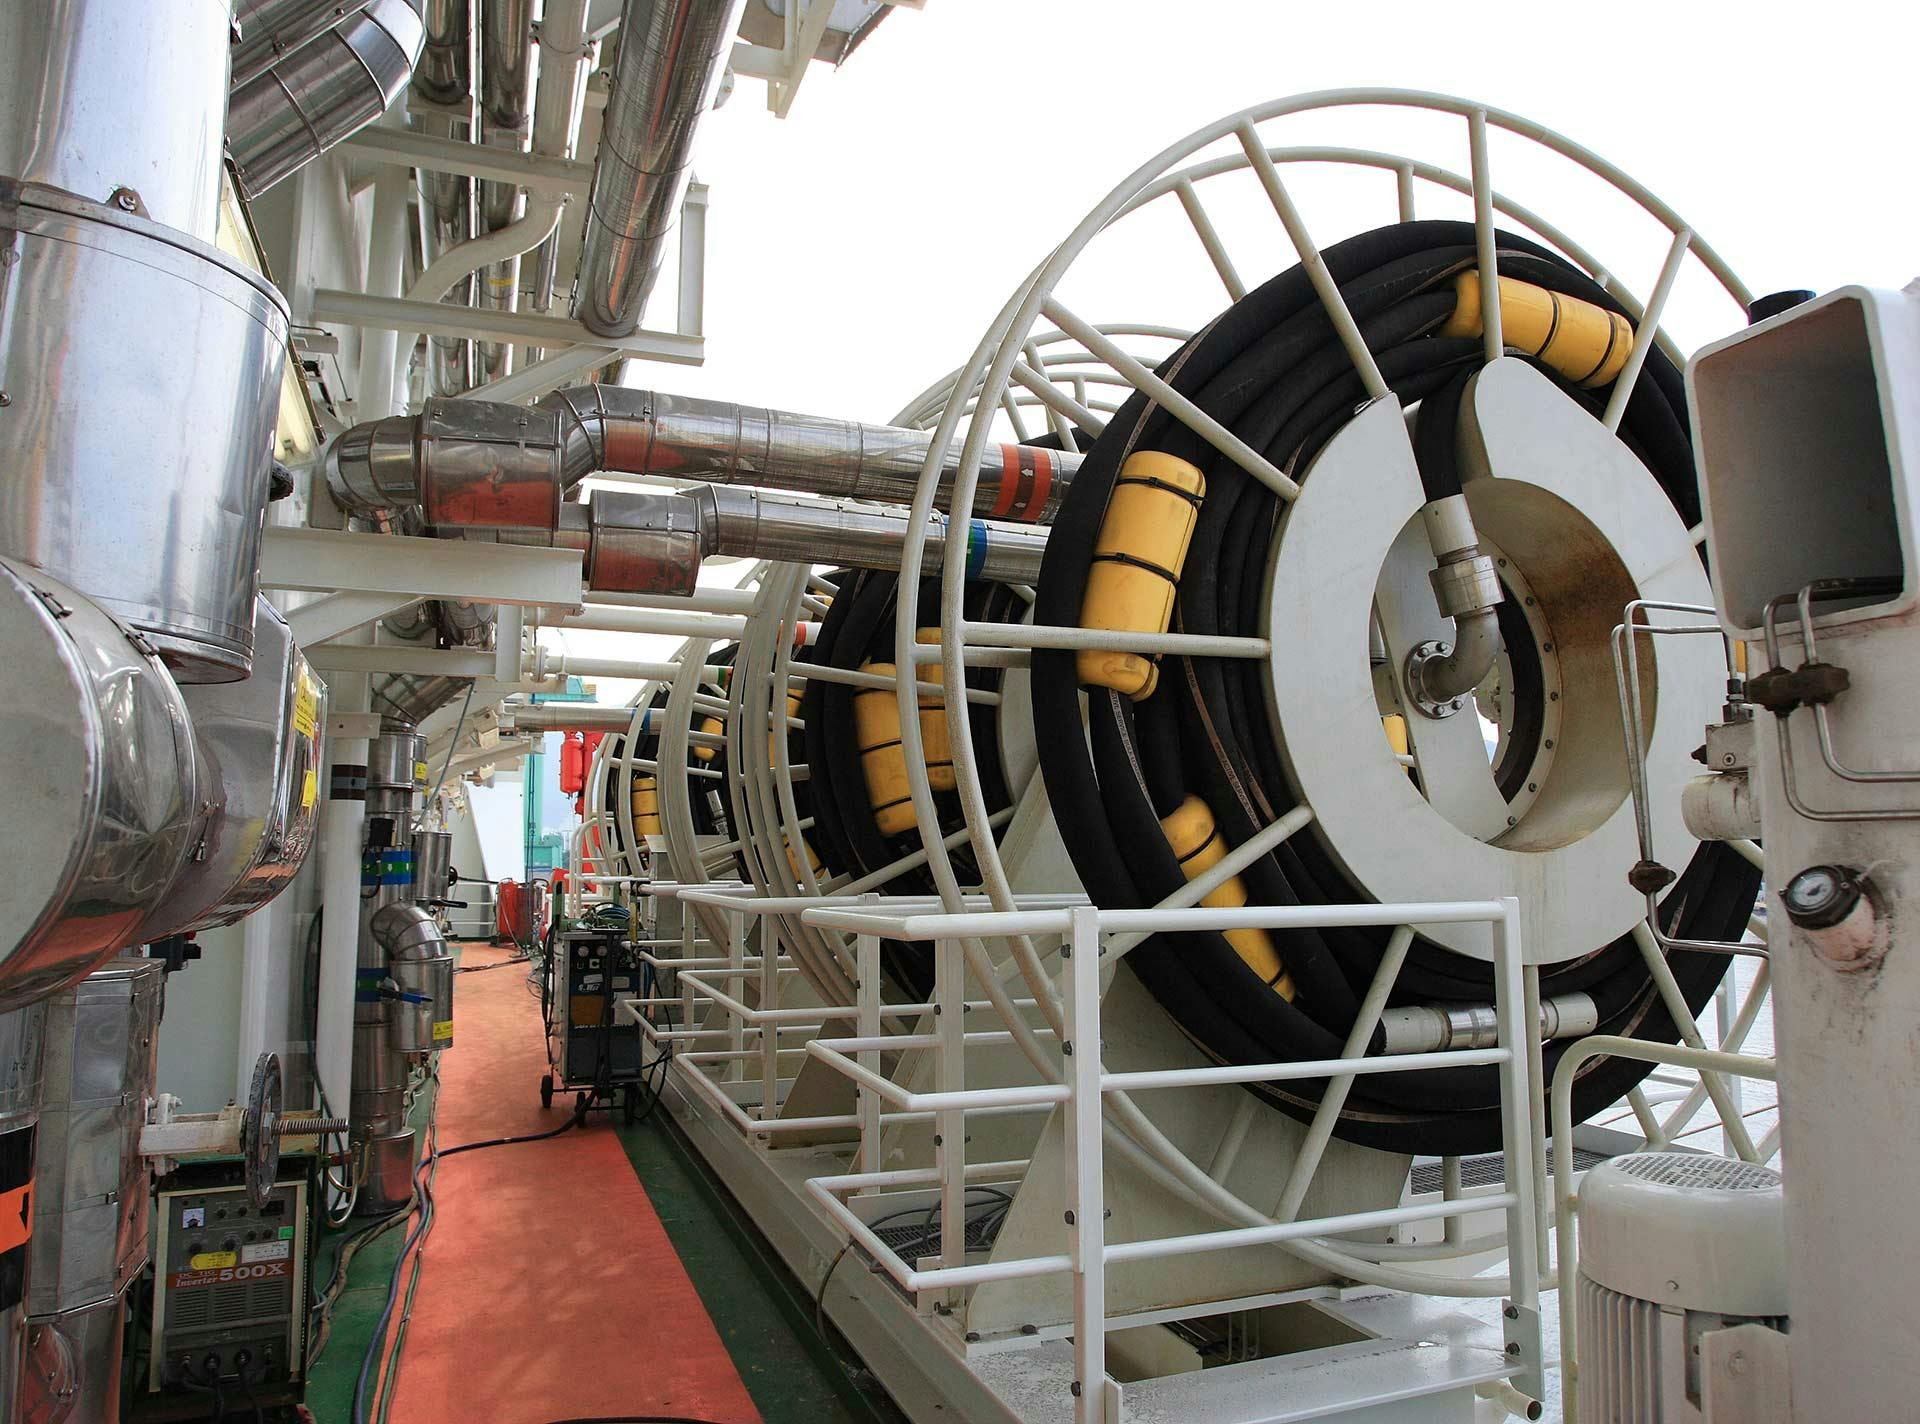 Hose loading station and hose reels as seen on the Stena Drillmax drillship